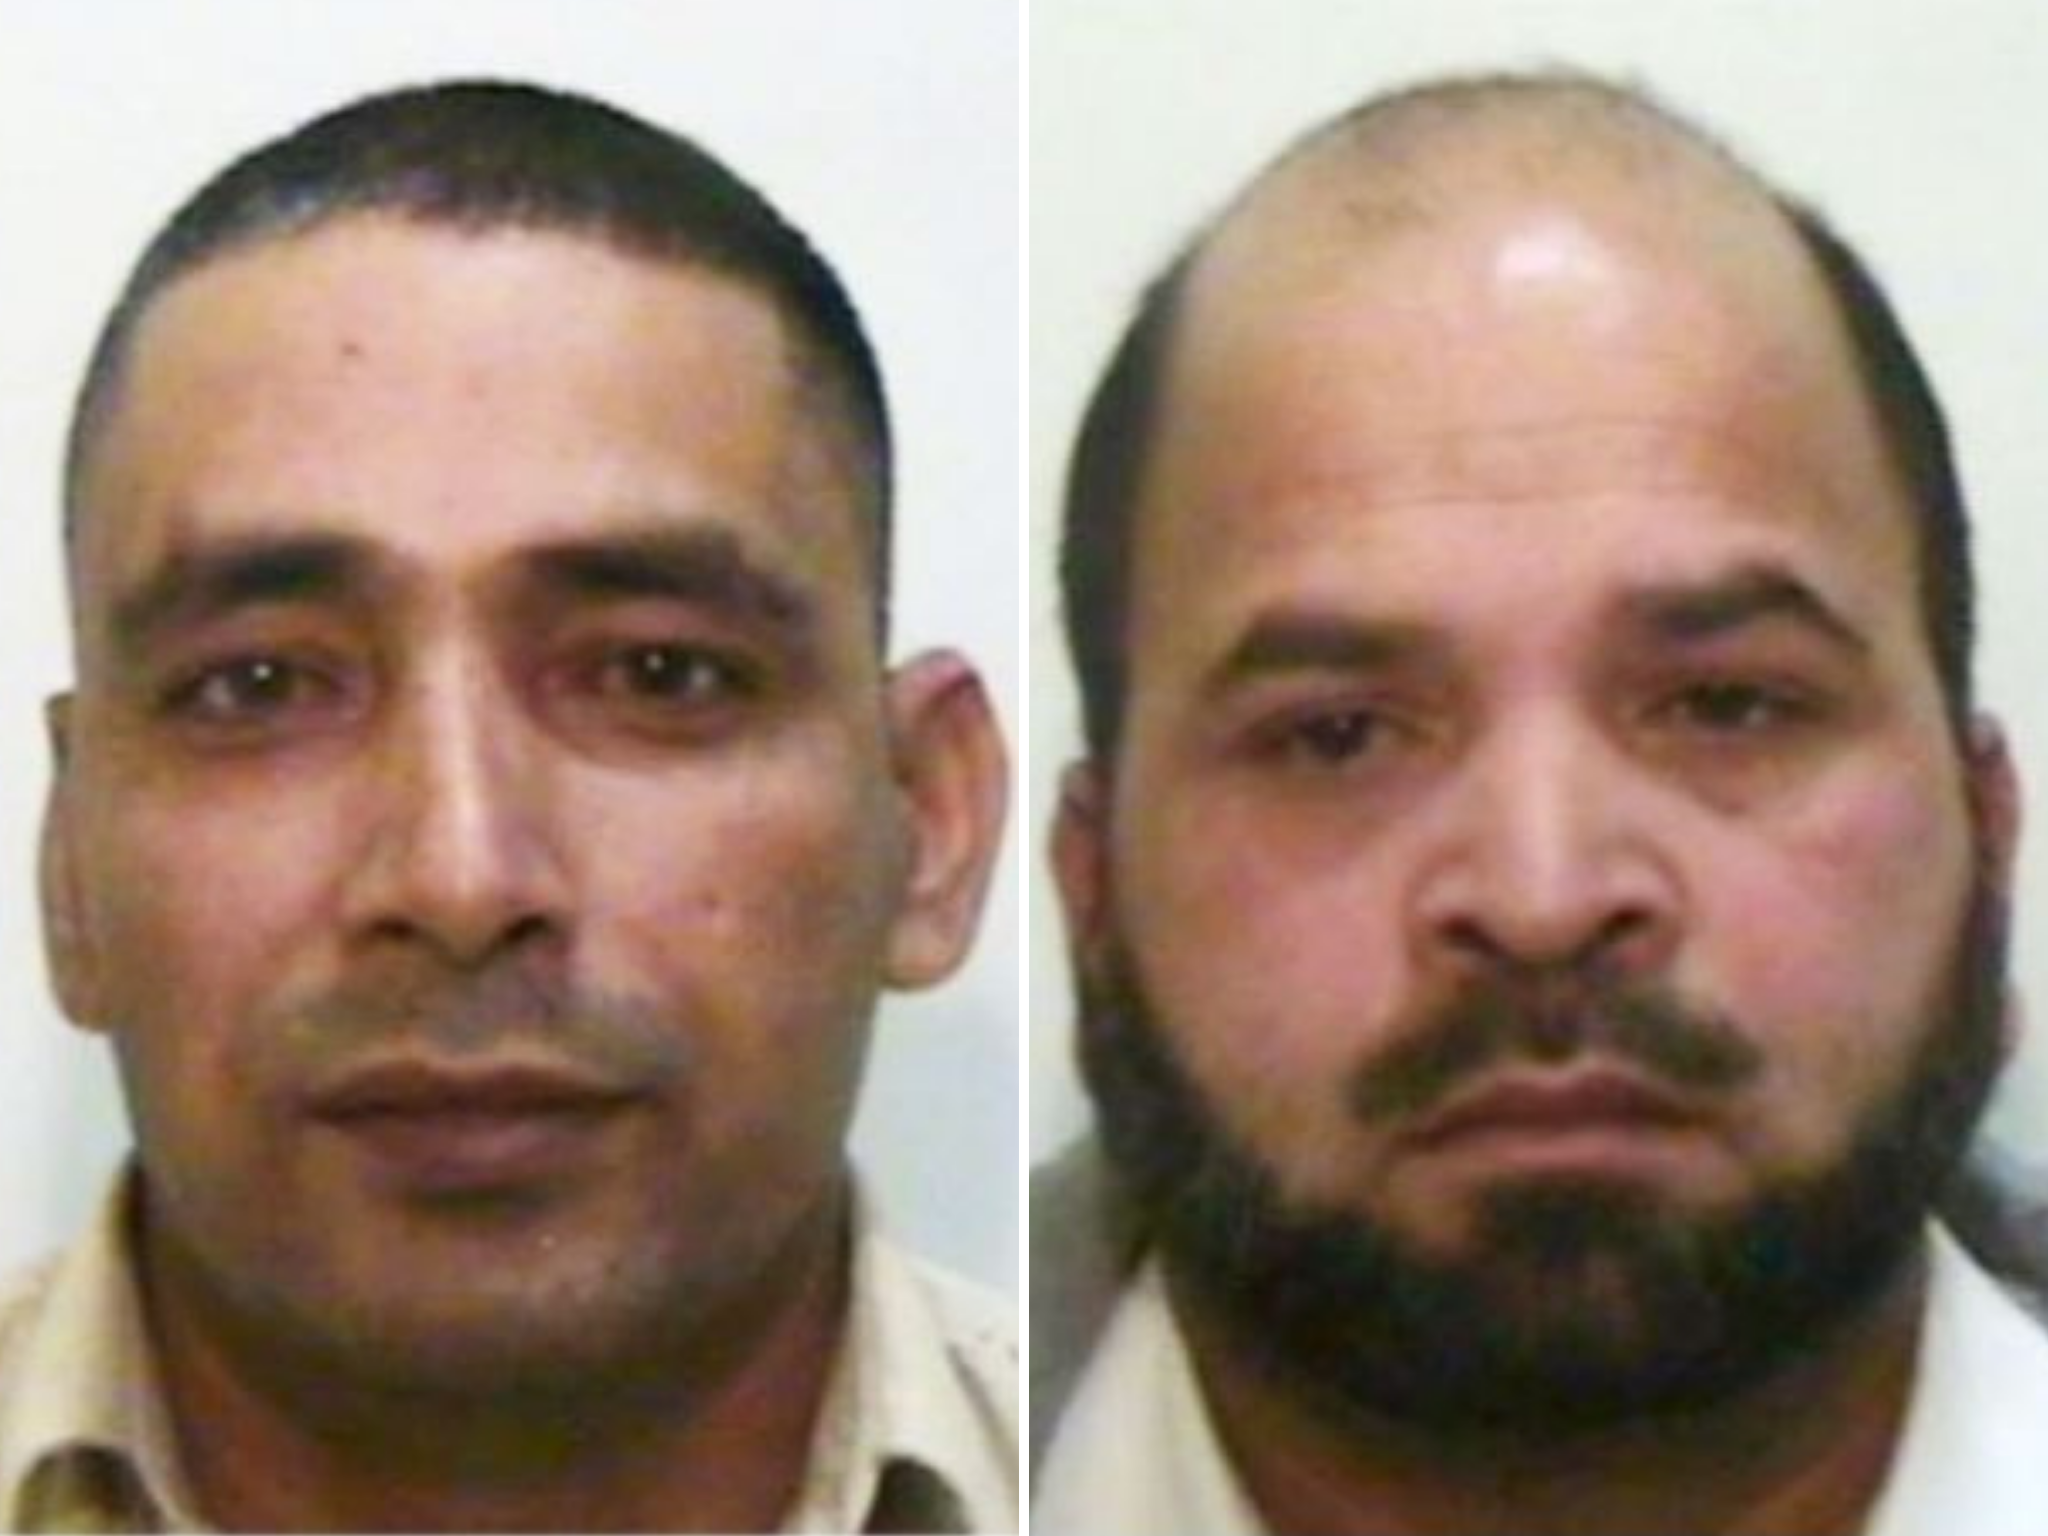 Adil Khan (left), 51 and Qari Abdul Rauf (right), 52, members of a Rochdale grooming gang, are fighting deportation from the UK to Pakistan